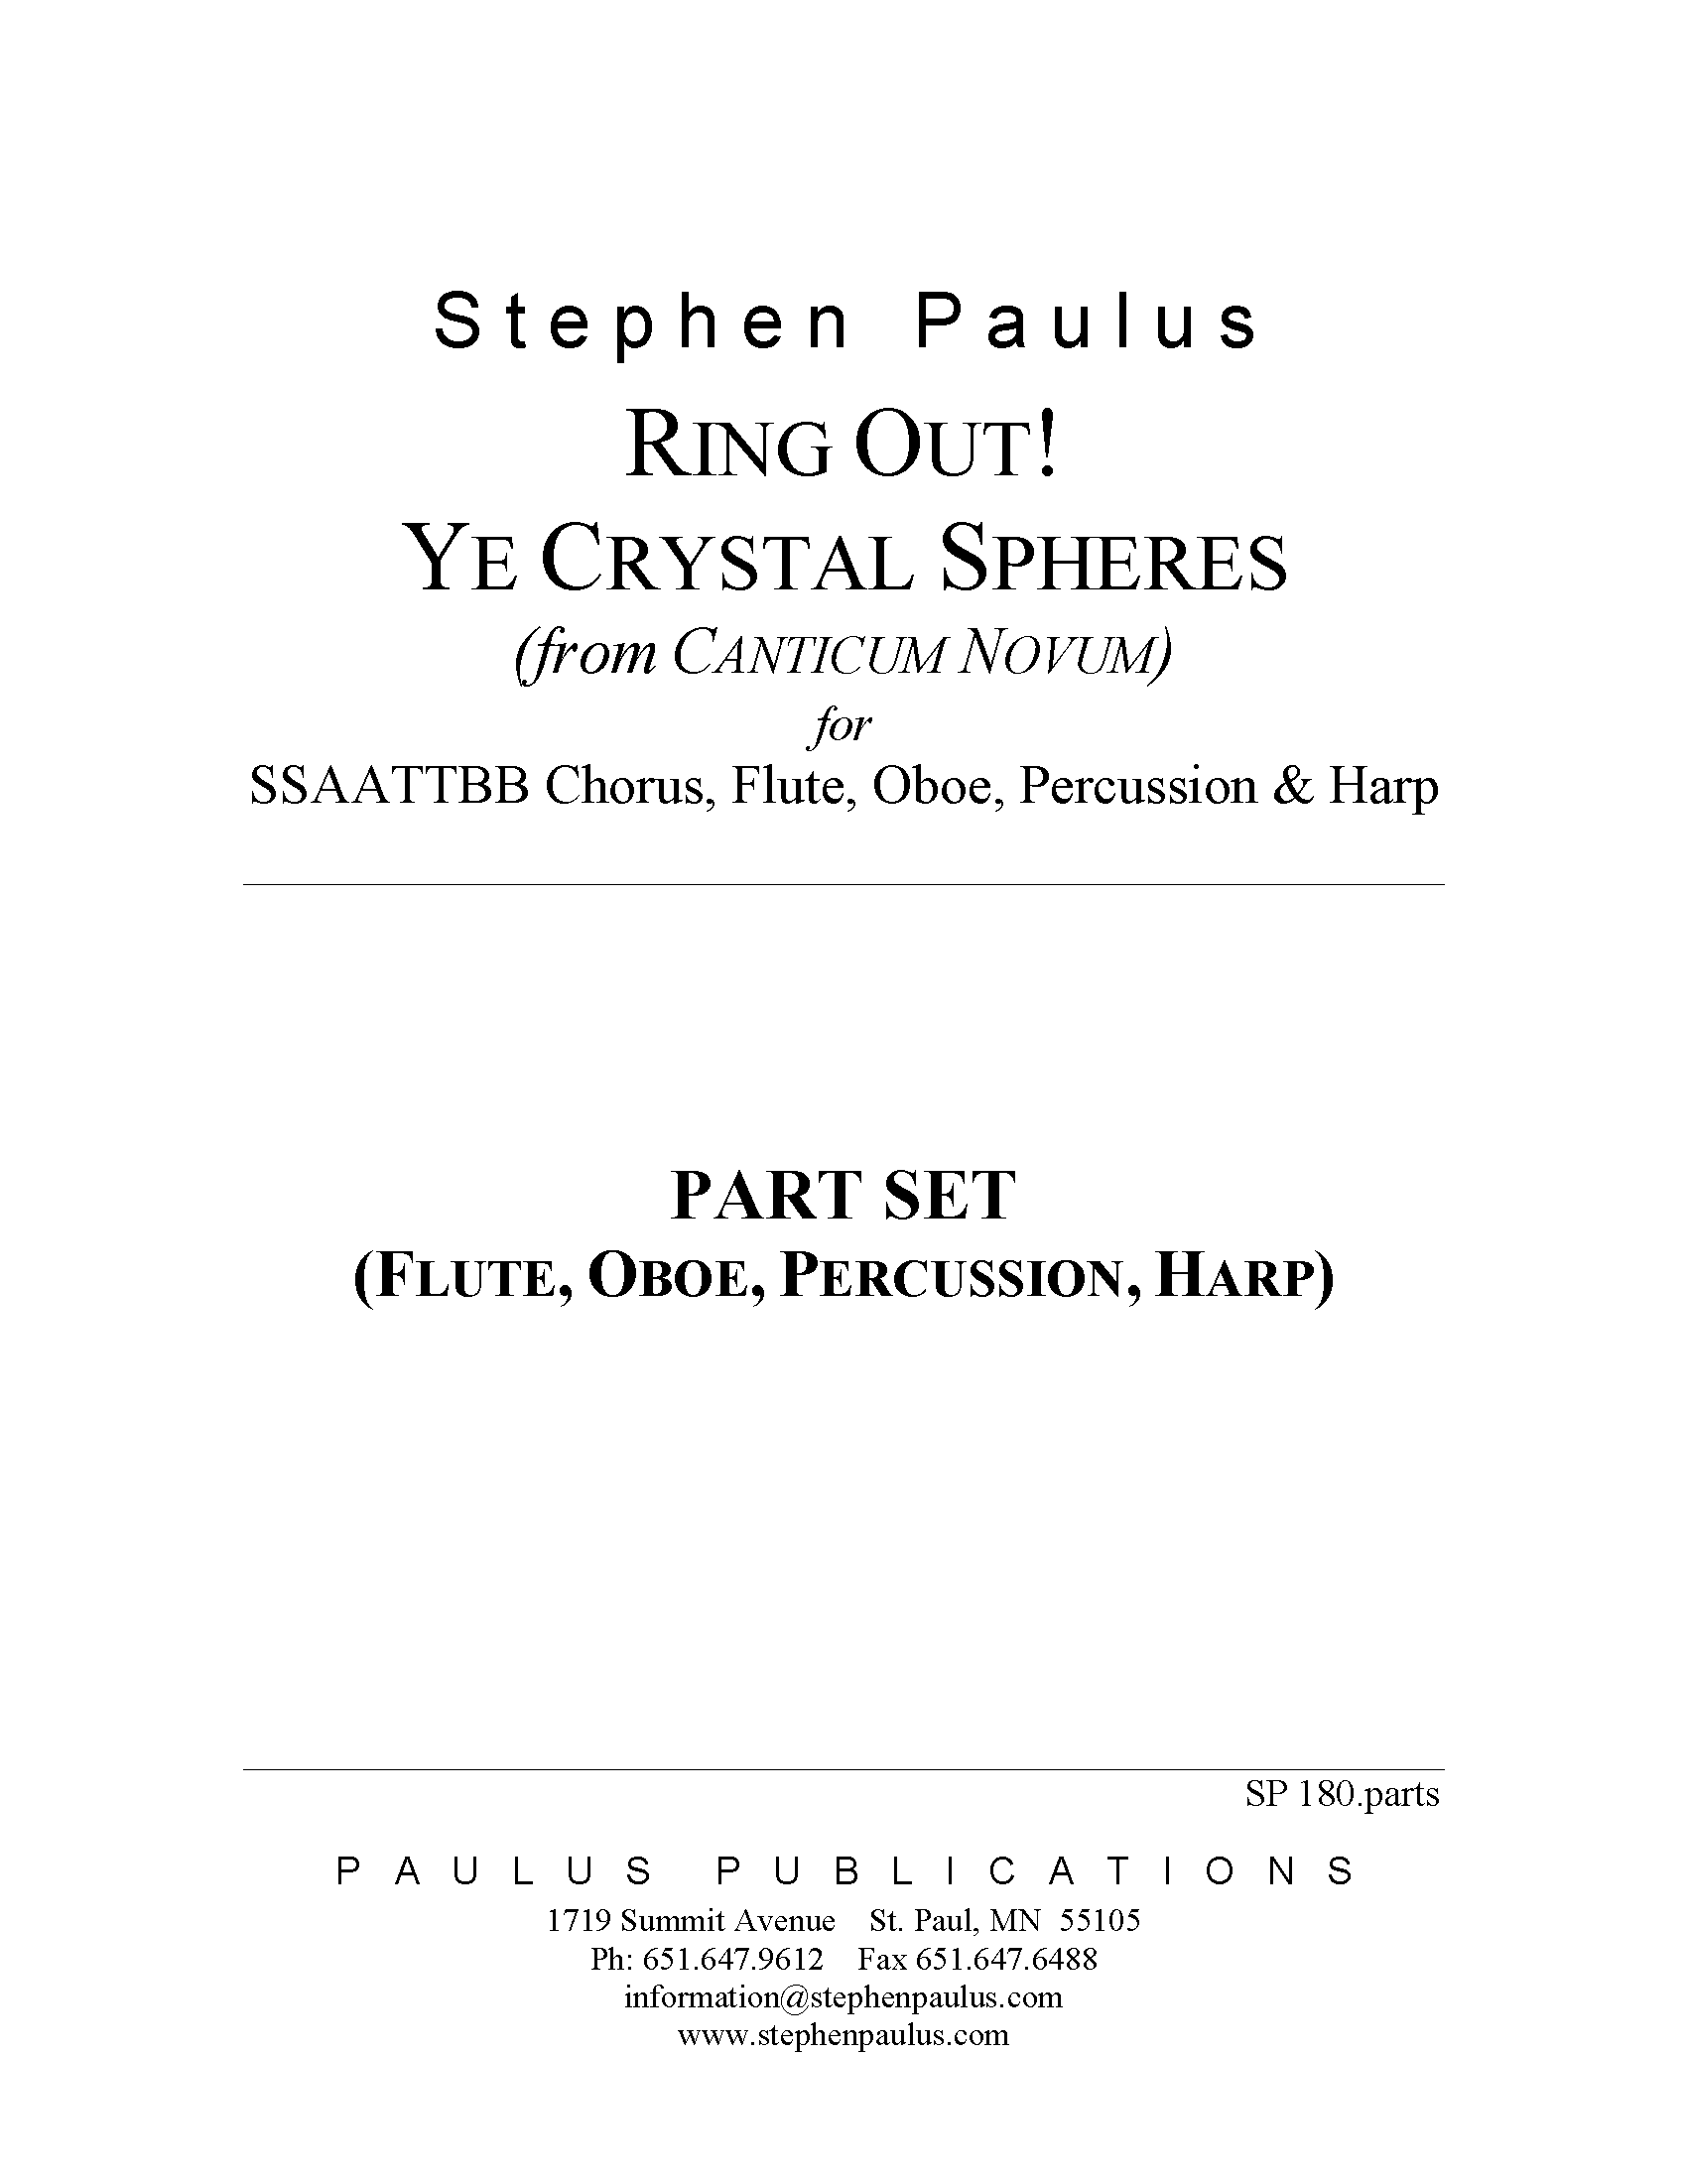 Ring Out! Ye Crystal Spheres - PARTS